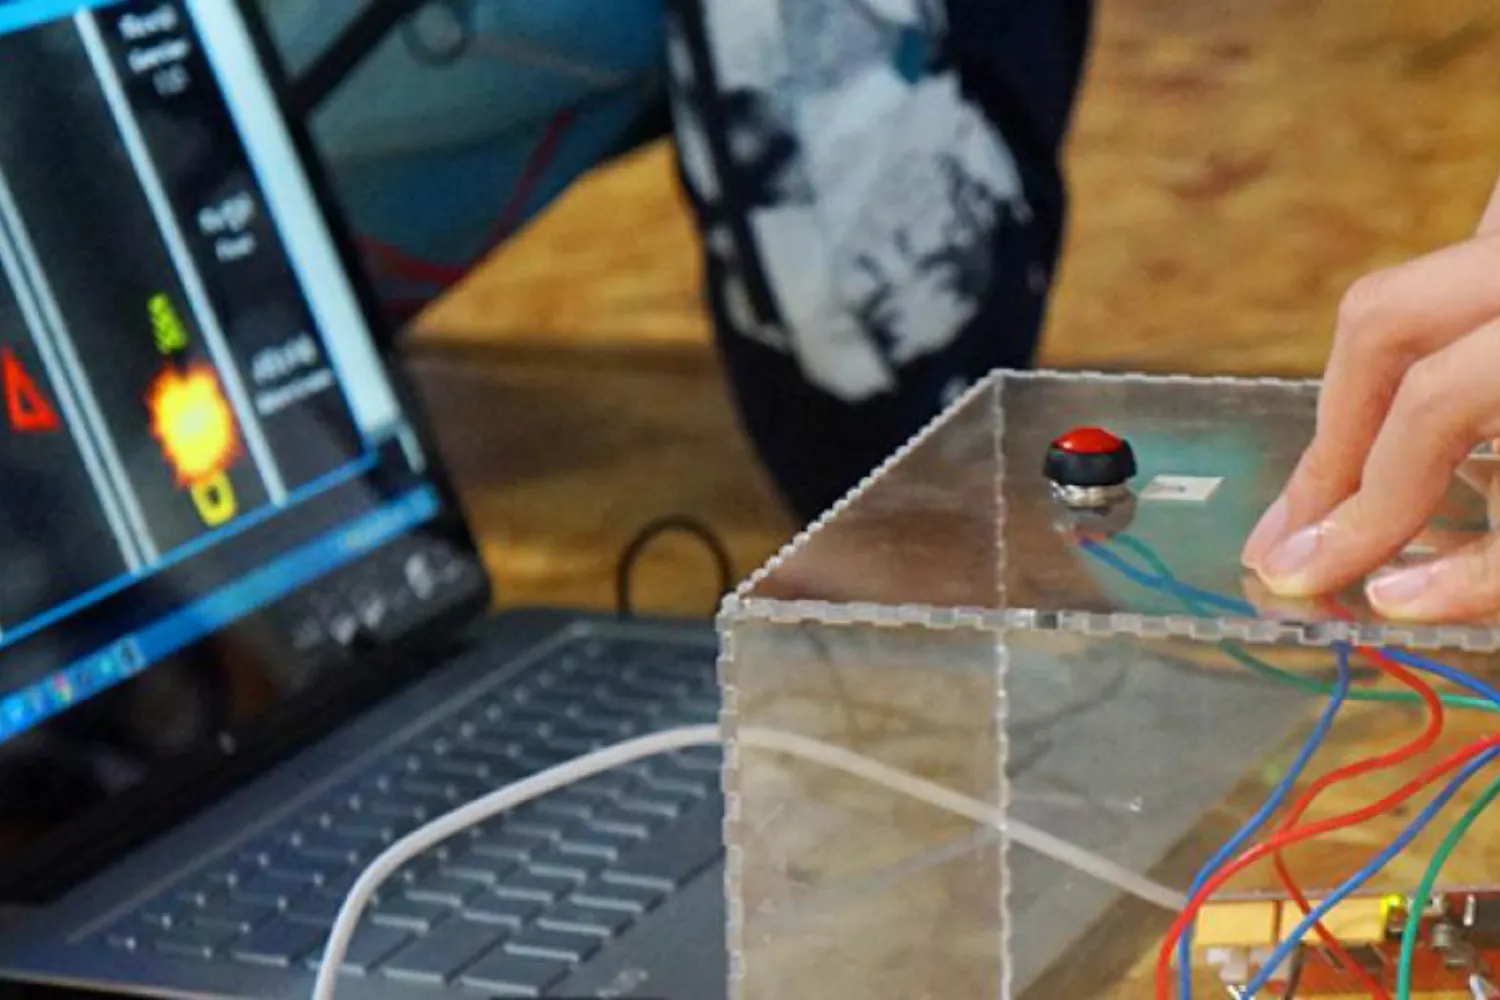 Fingers resting on an acrylic cube sporting buttons to control a game unfolding on a laptop screen visible in the background